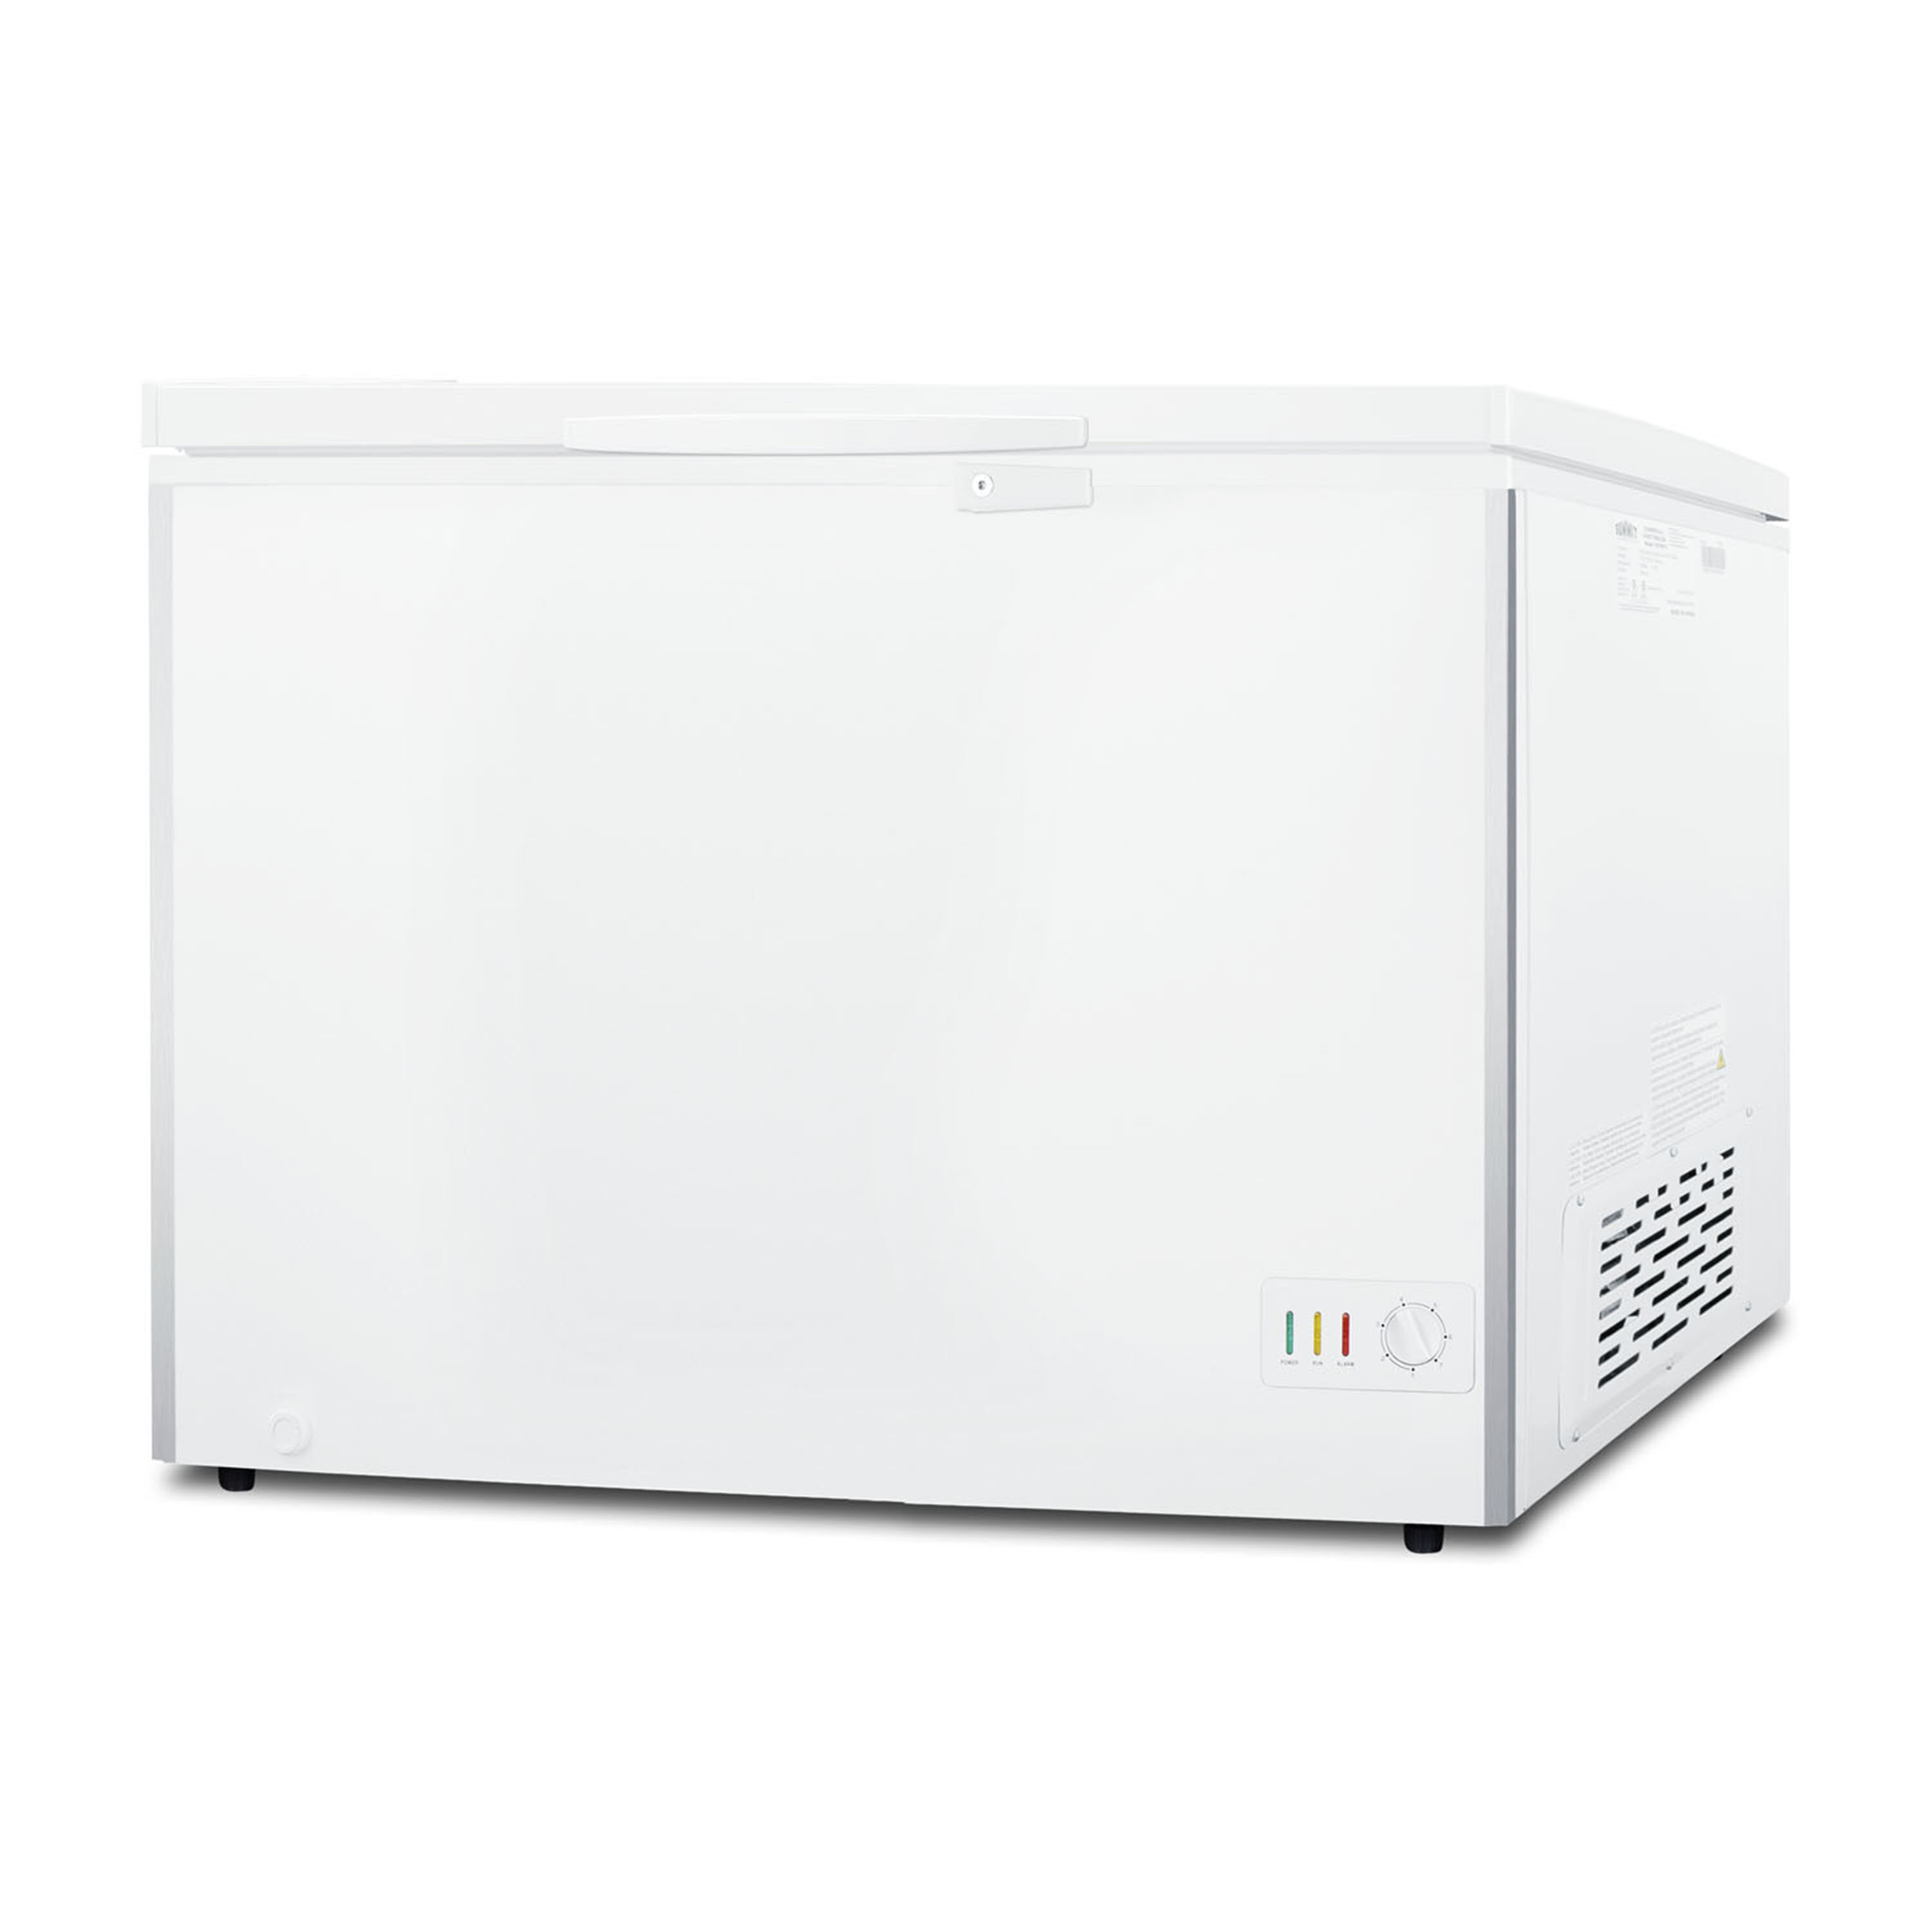 GE Garage Ready 10.7-cu ft Manual Defrost Chest Freezer (White) in